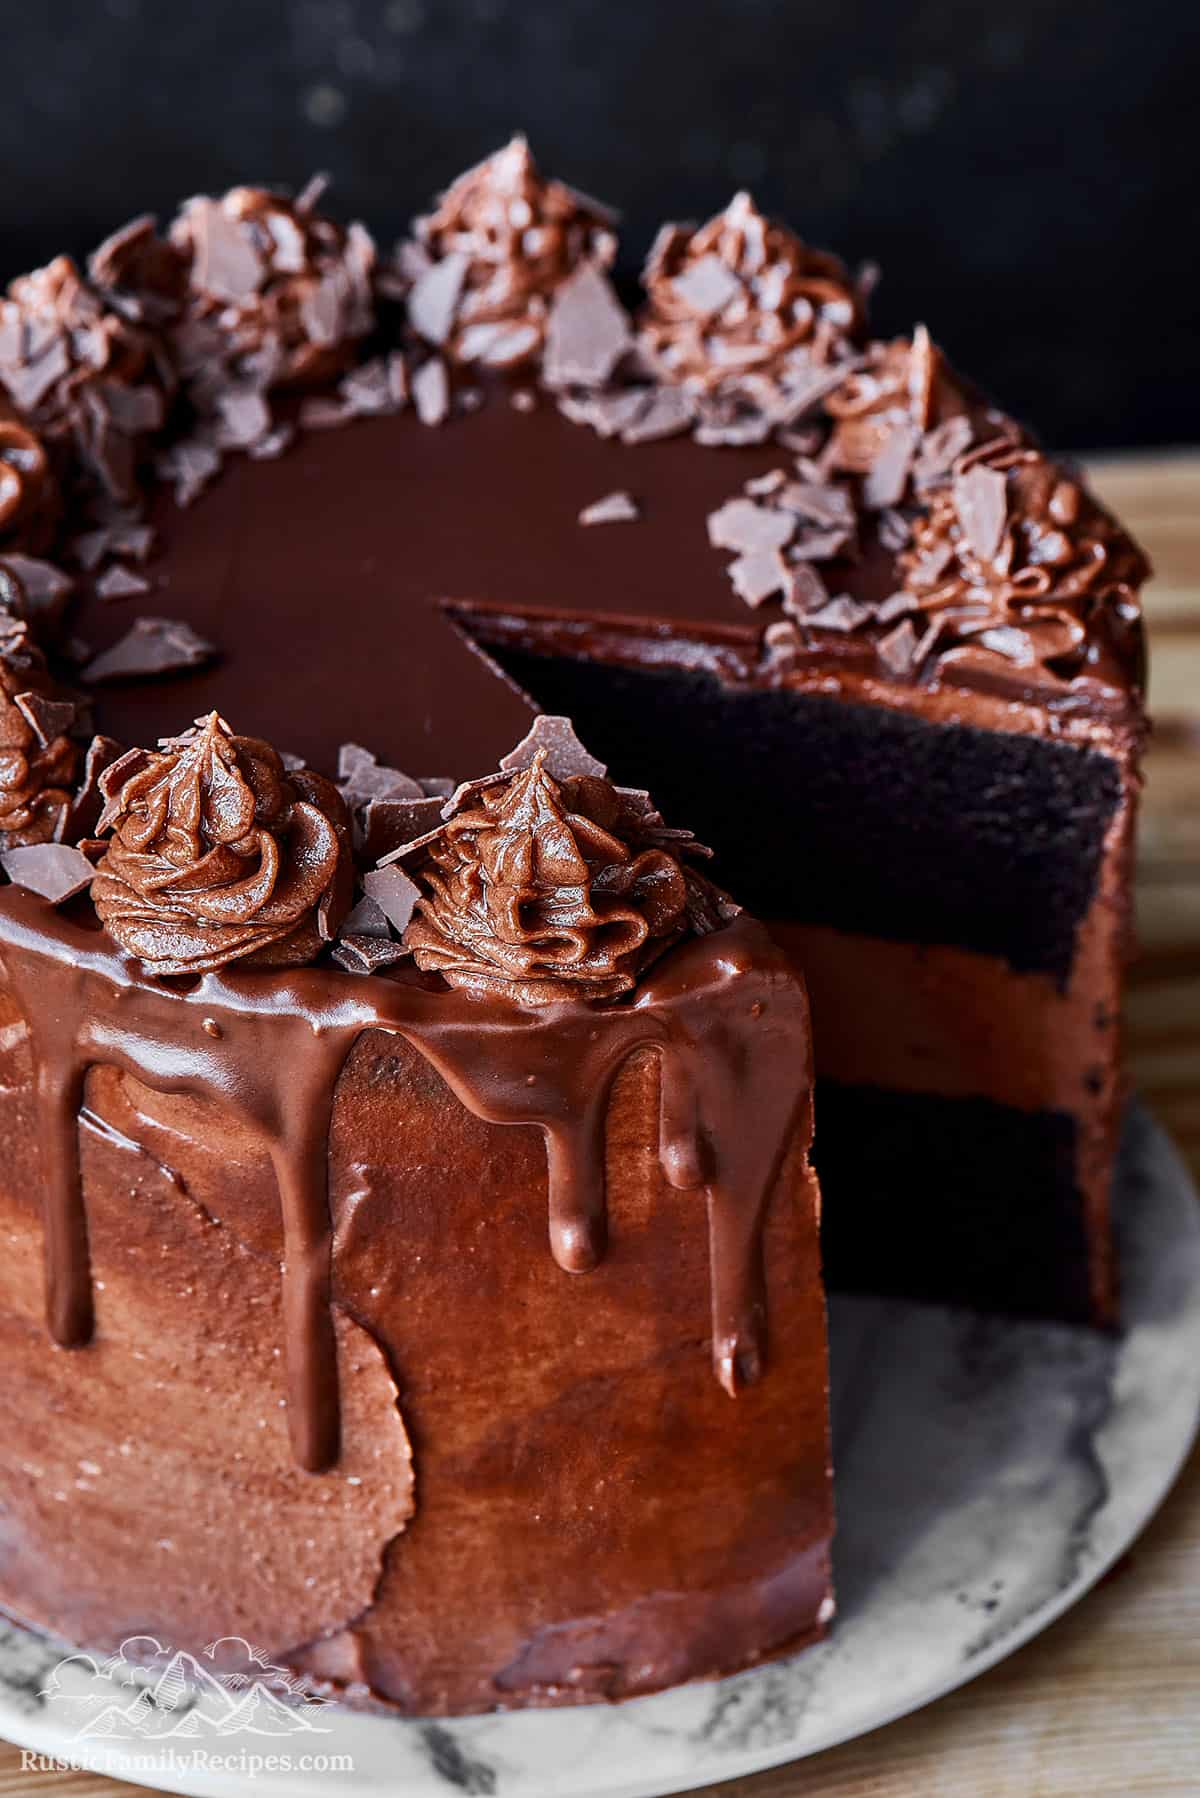 Close-up of sliced devil's chocolate cake drizzled with ganache.